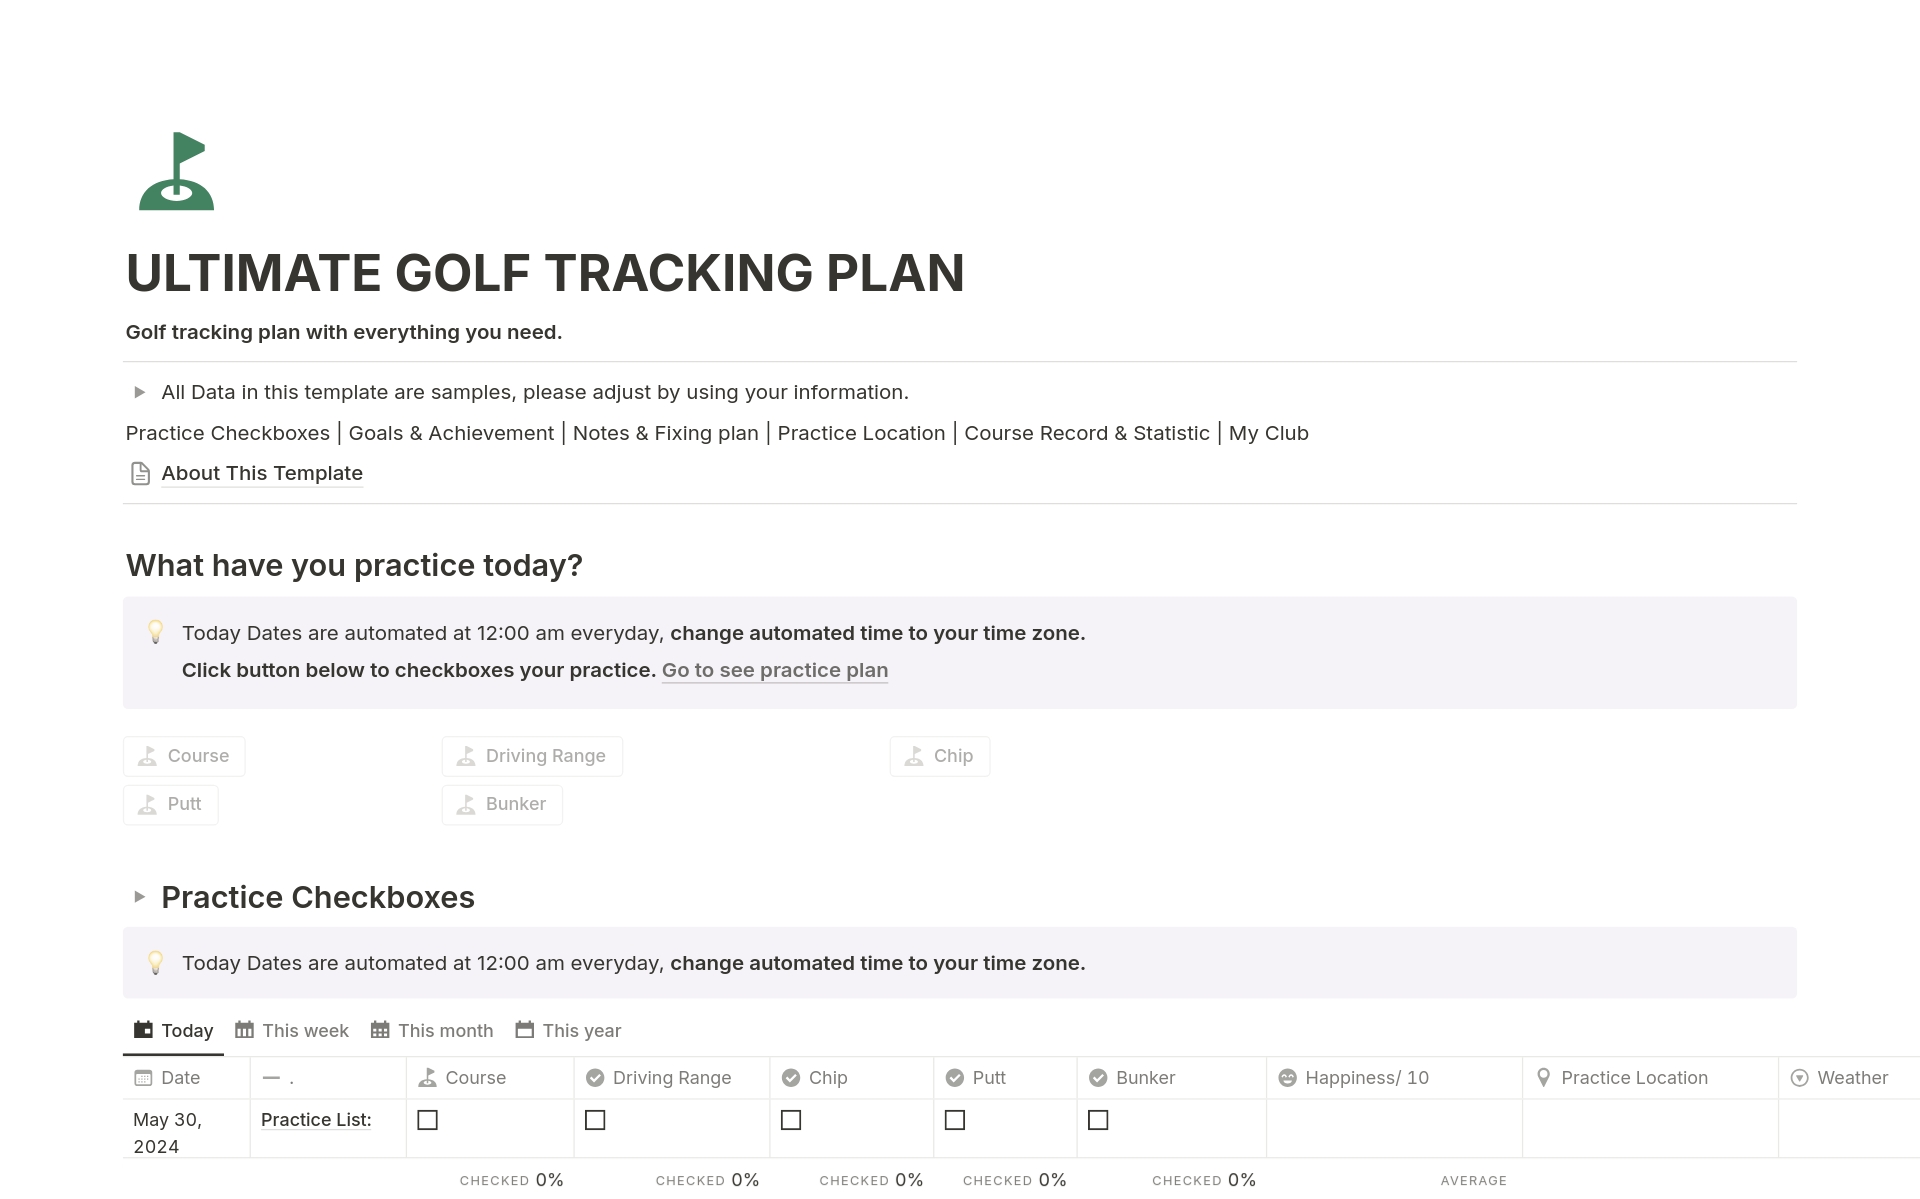 Golf Tracking Plan with everything you need.